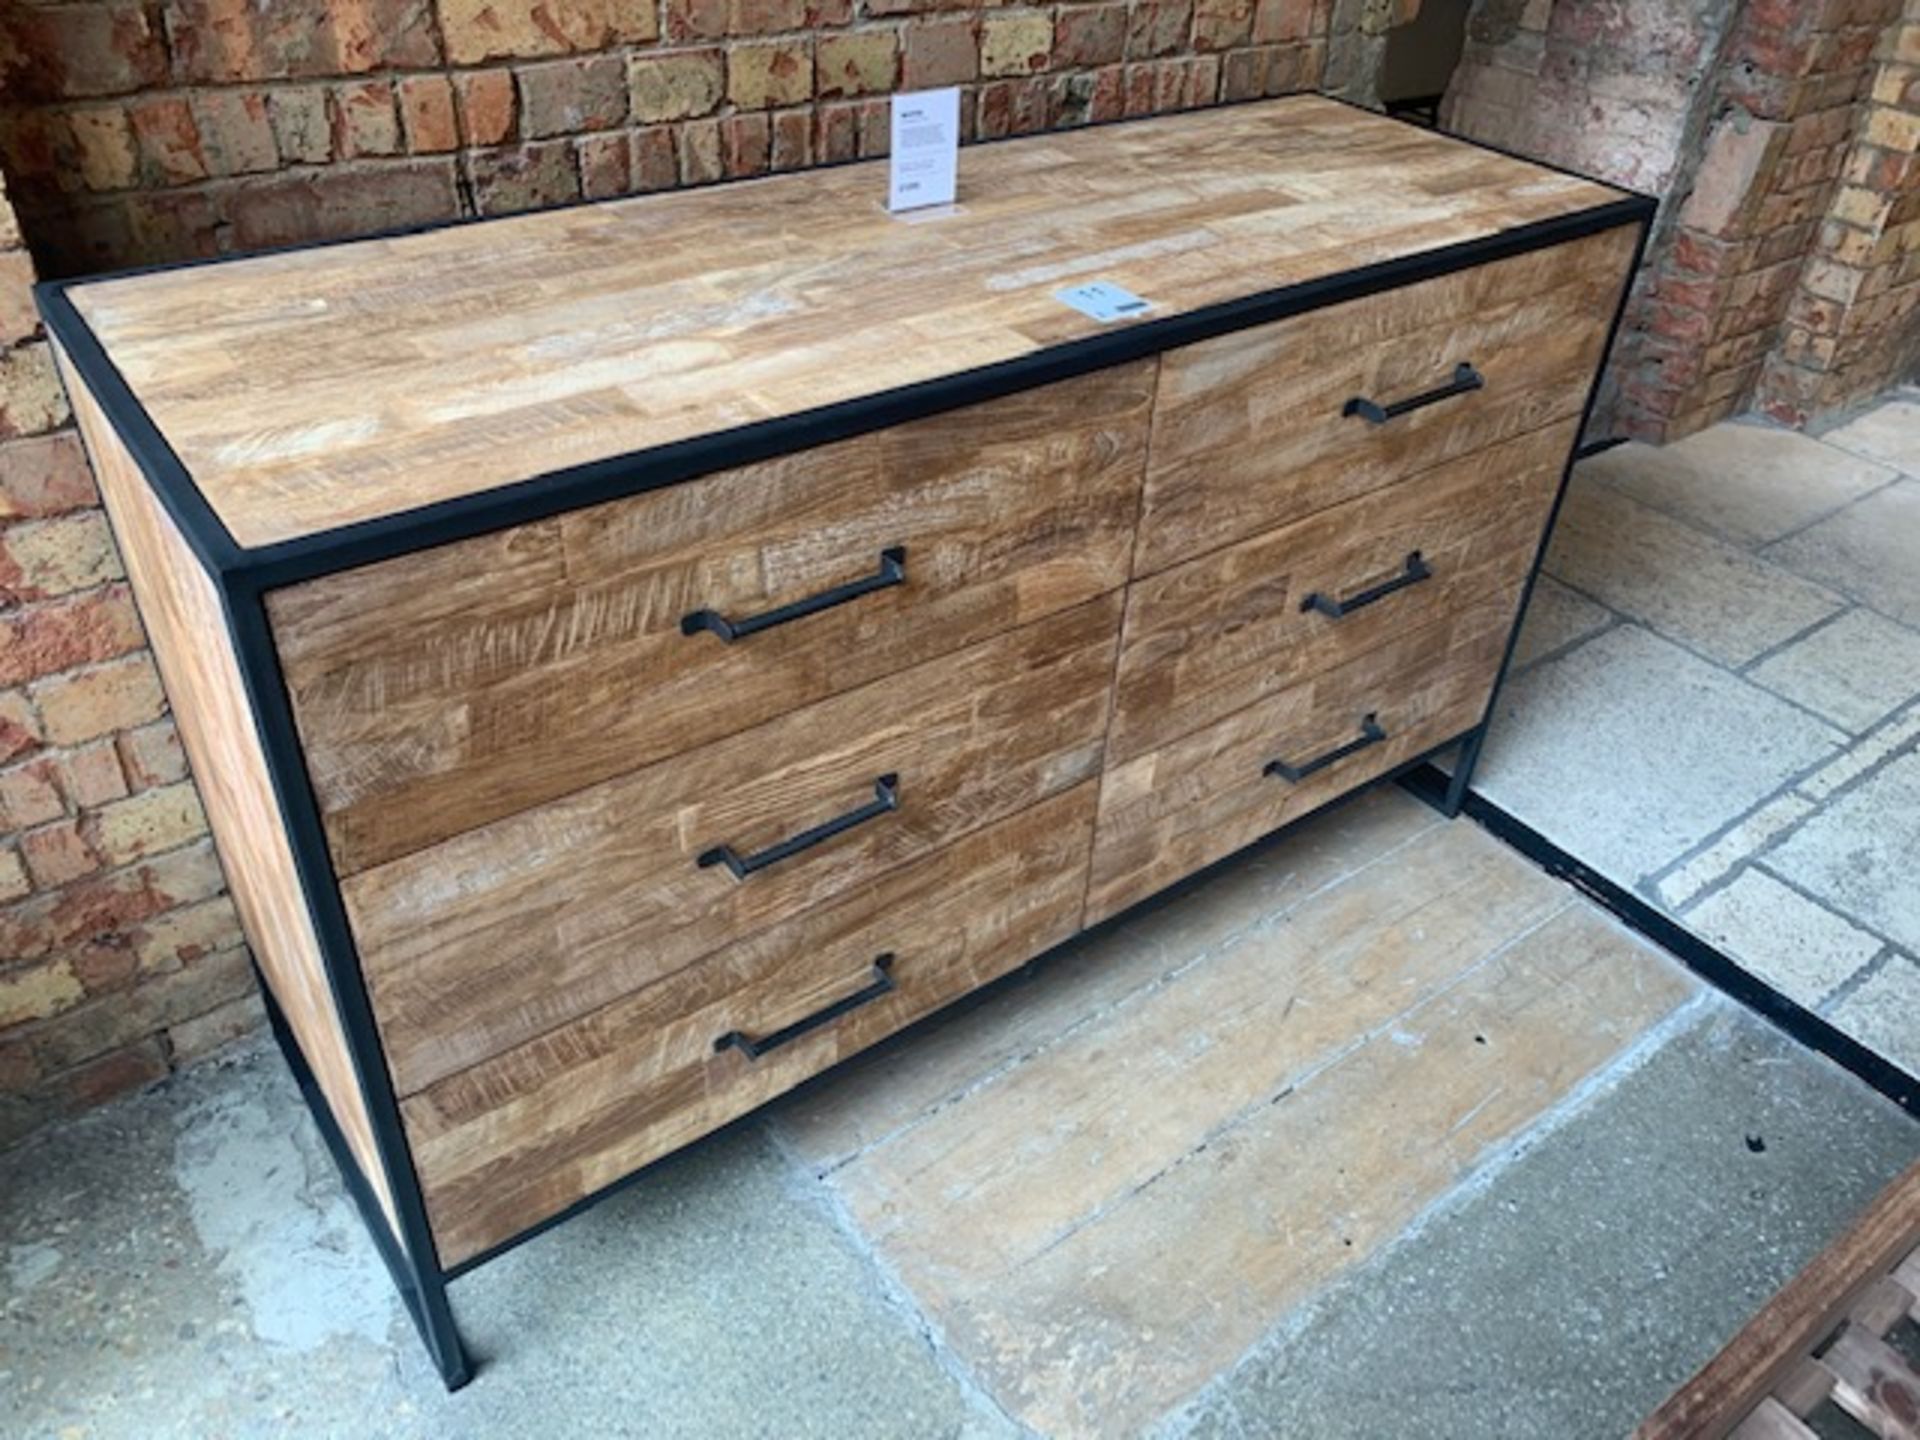 Lombok Baxter 6 drawer chest made from reclaimed teak and industrial steel W150cm D52 H89cm RRP £